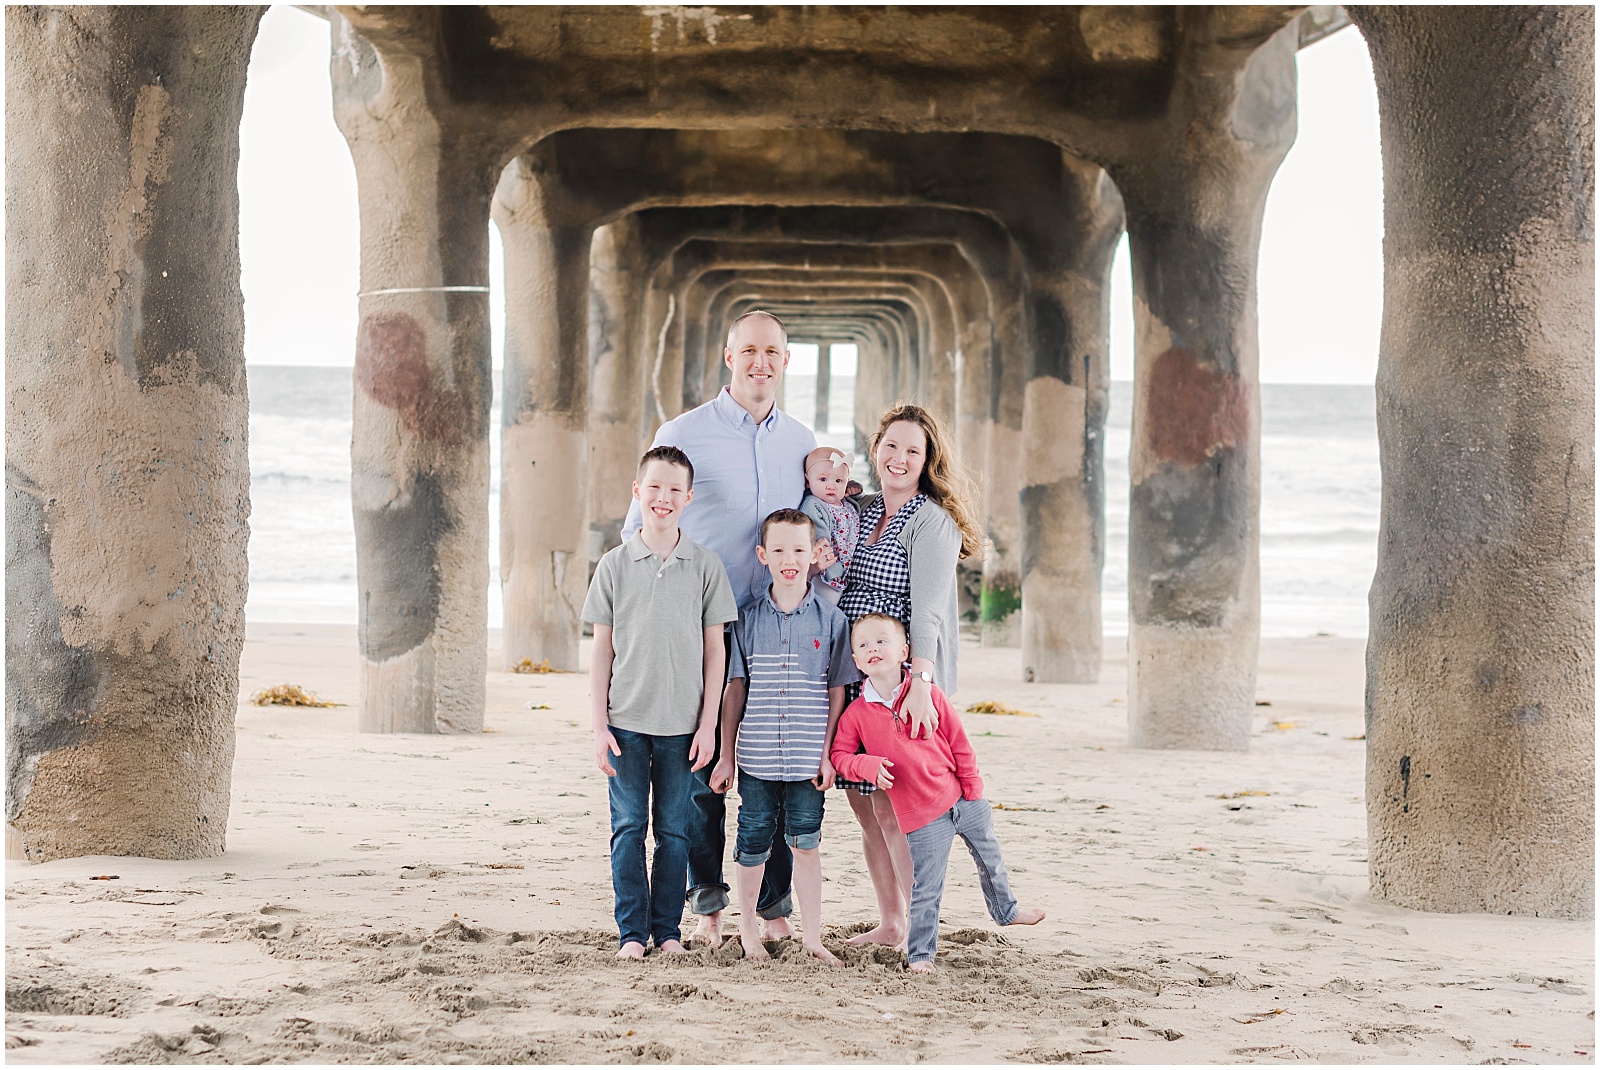 Manhattan Beach Family Session. Photography by Mollie Jane Photography. To see more go to www.molliejanephotography.com